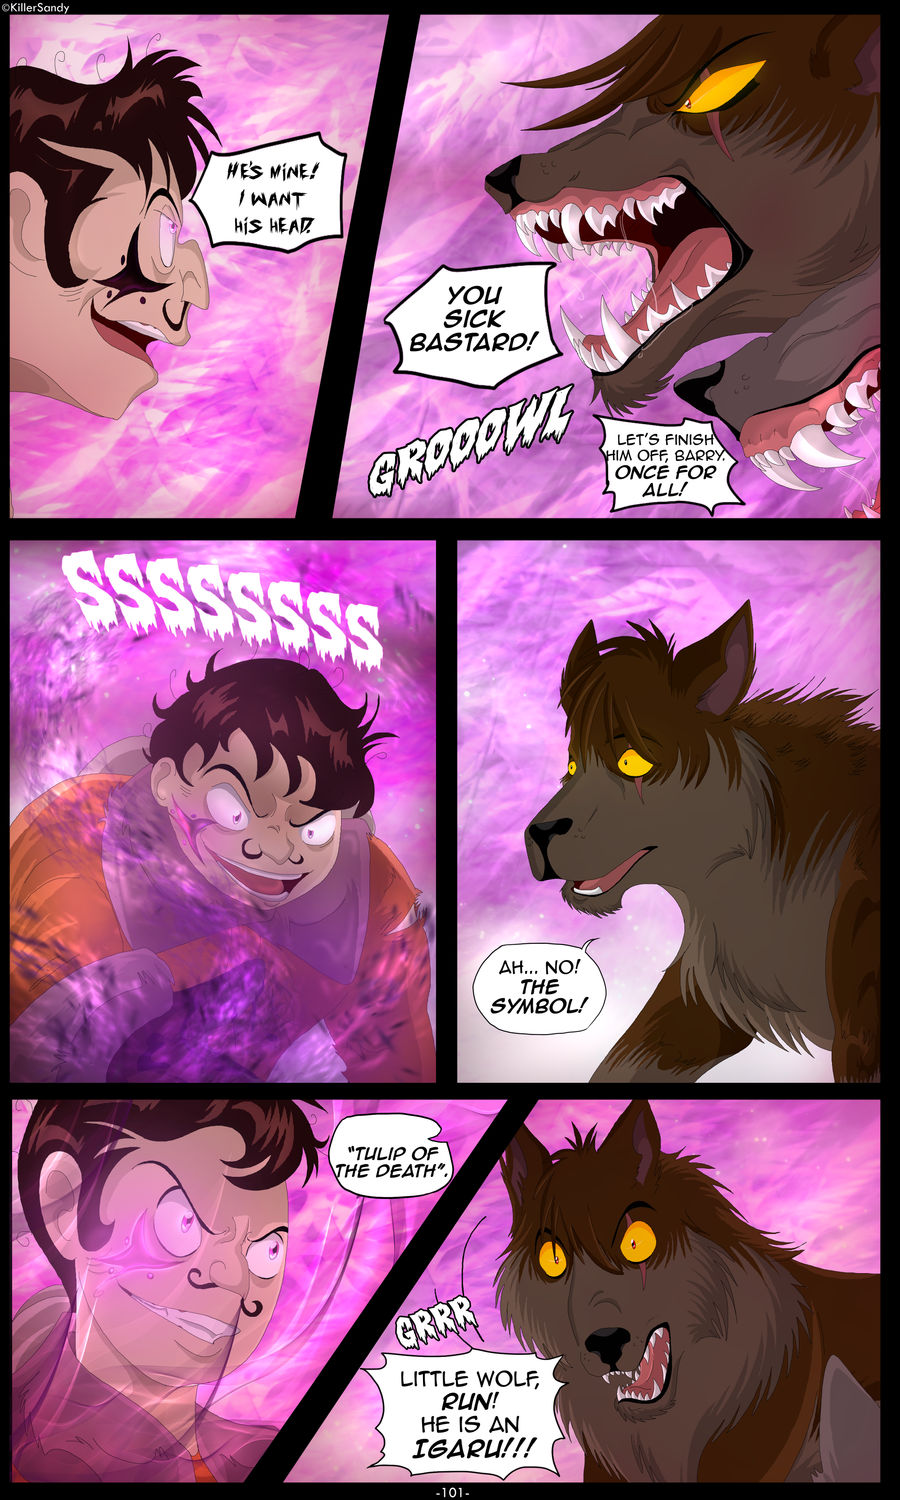 The Prince of the Moonlight Stone page 101